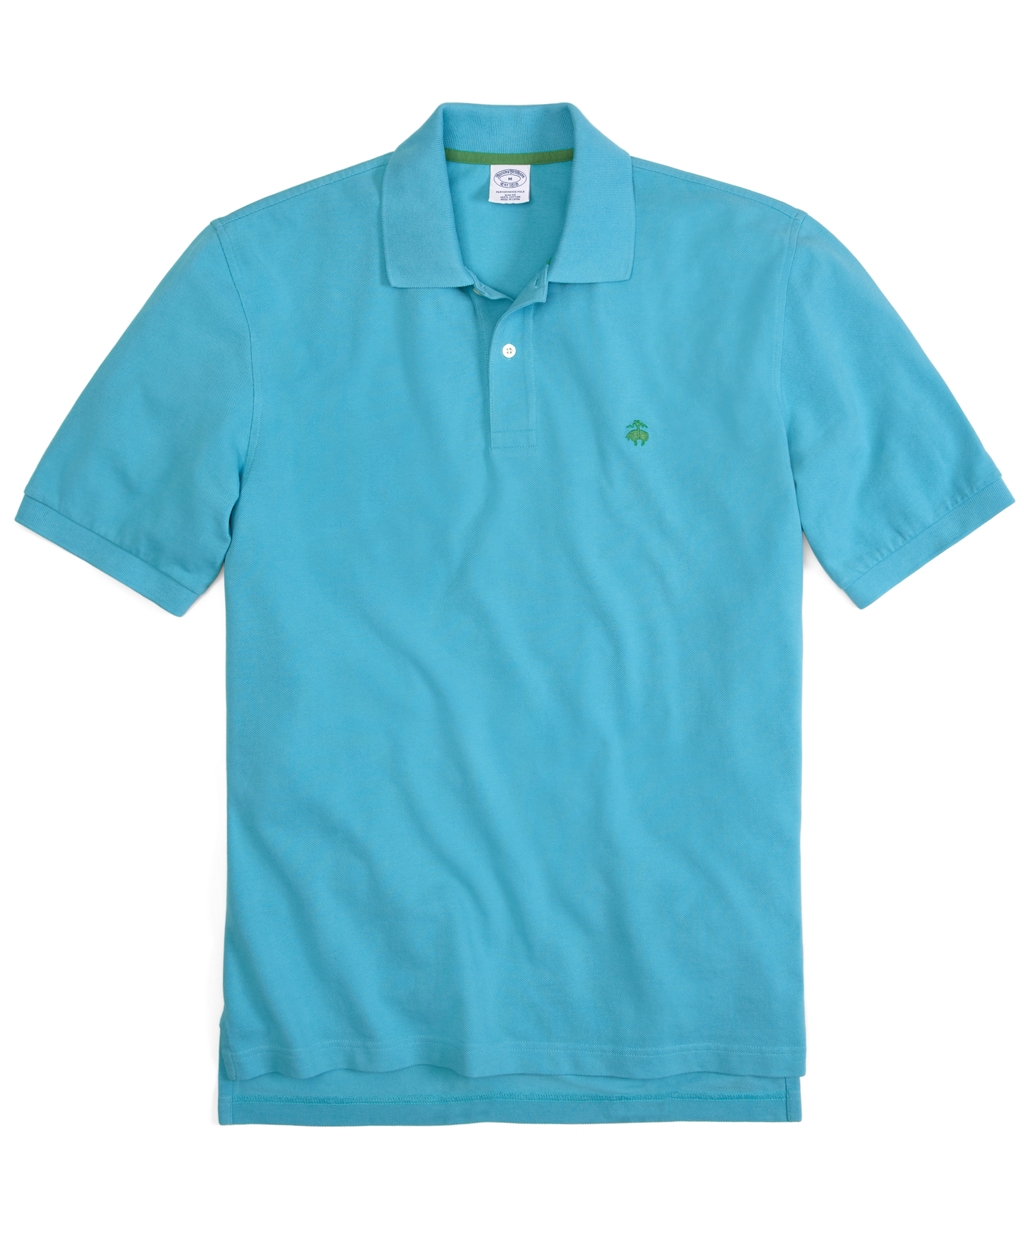 Brooks Brothers Golden Fleece® Original Fit Performance Polo Shirt in ...